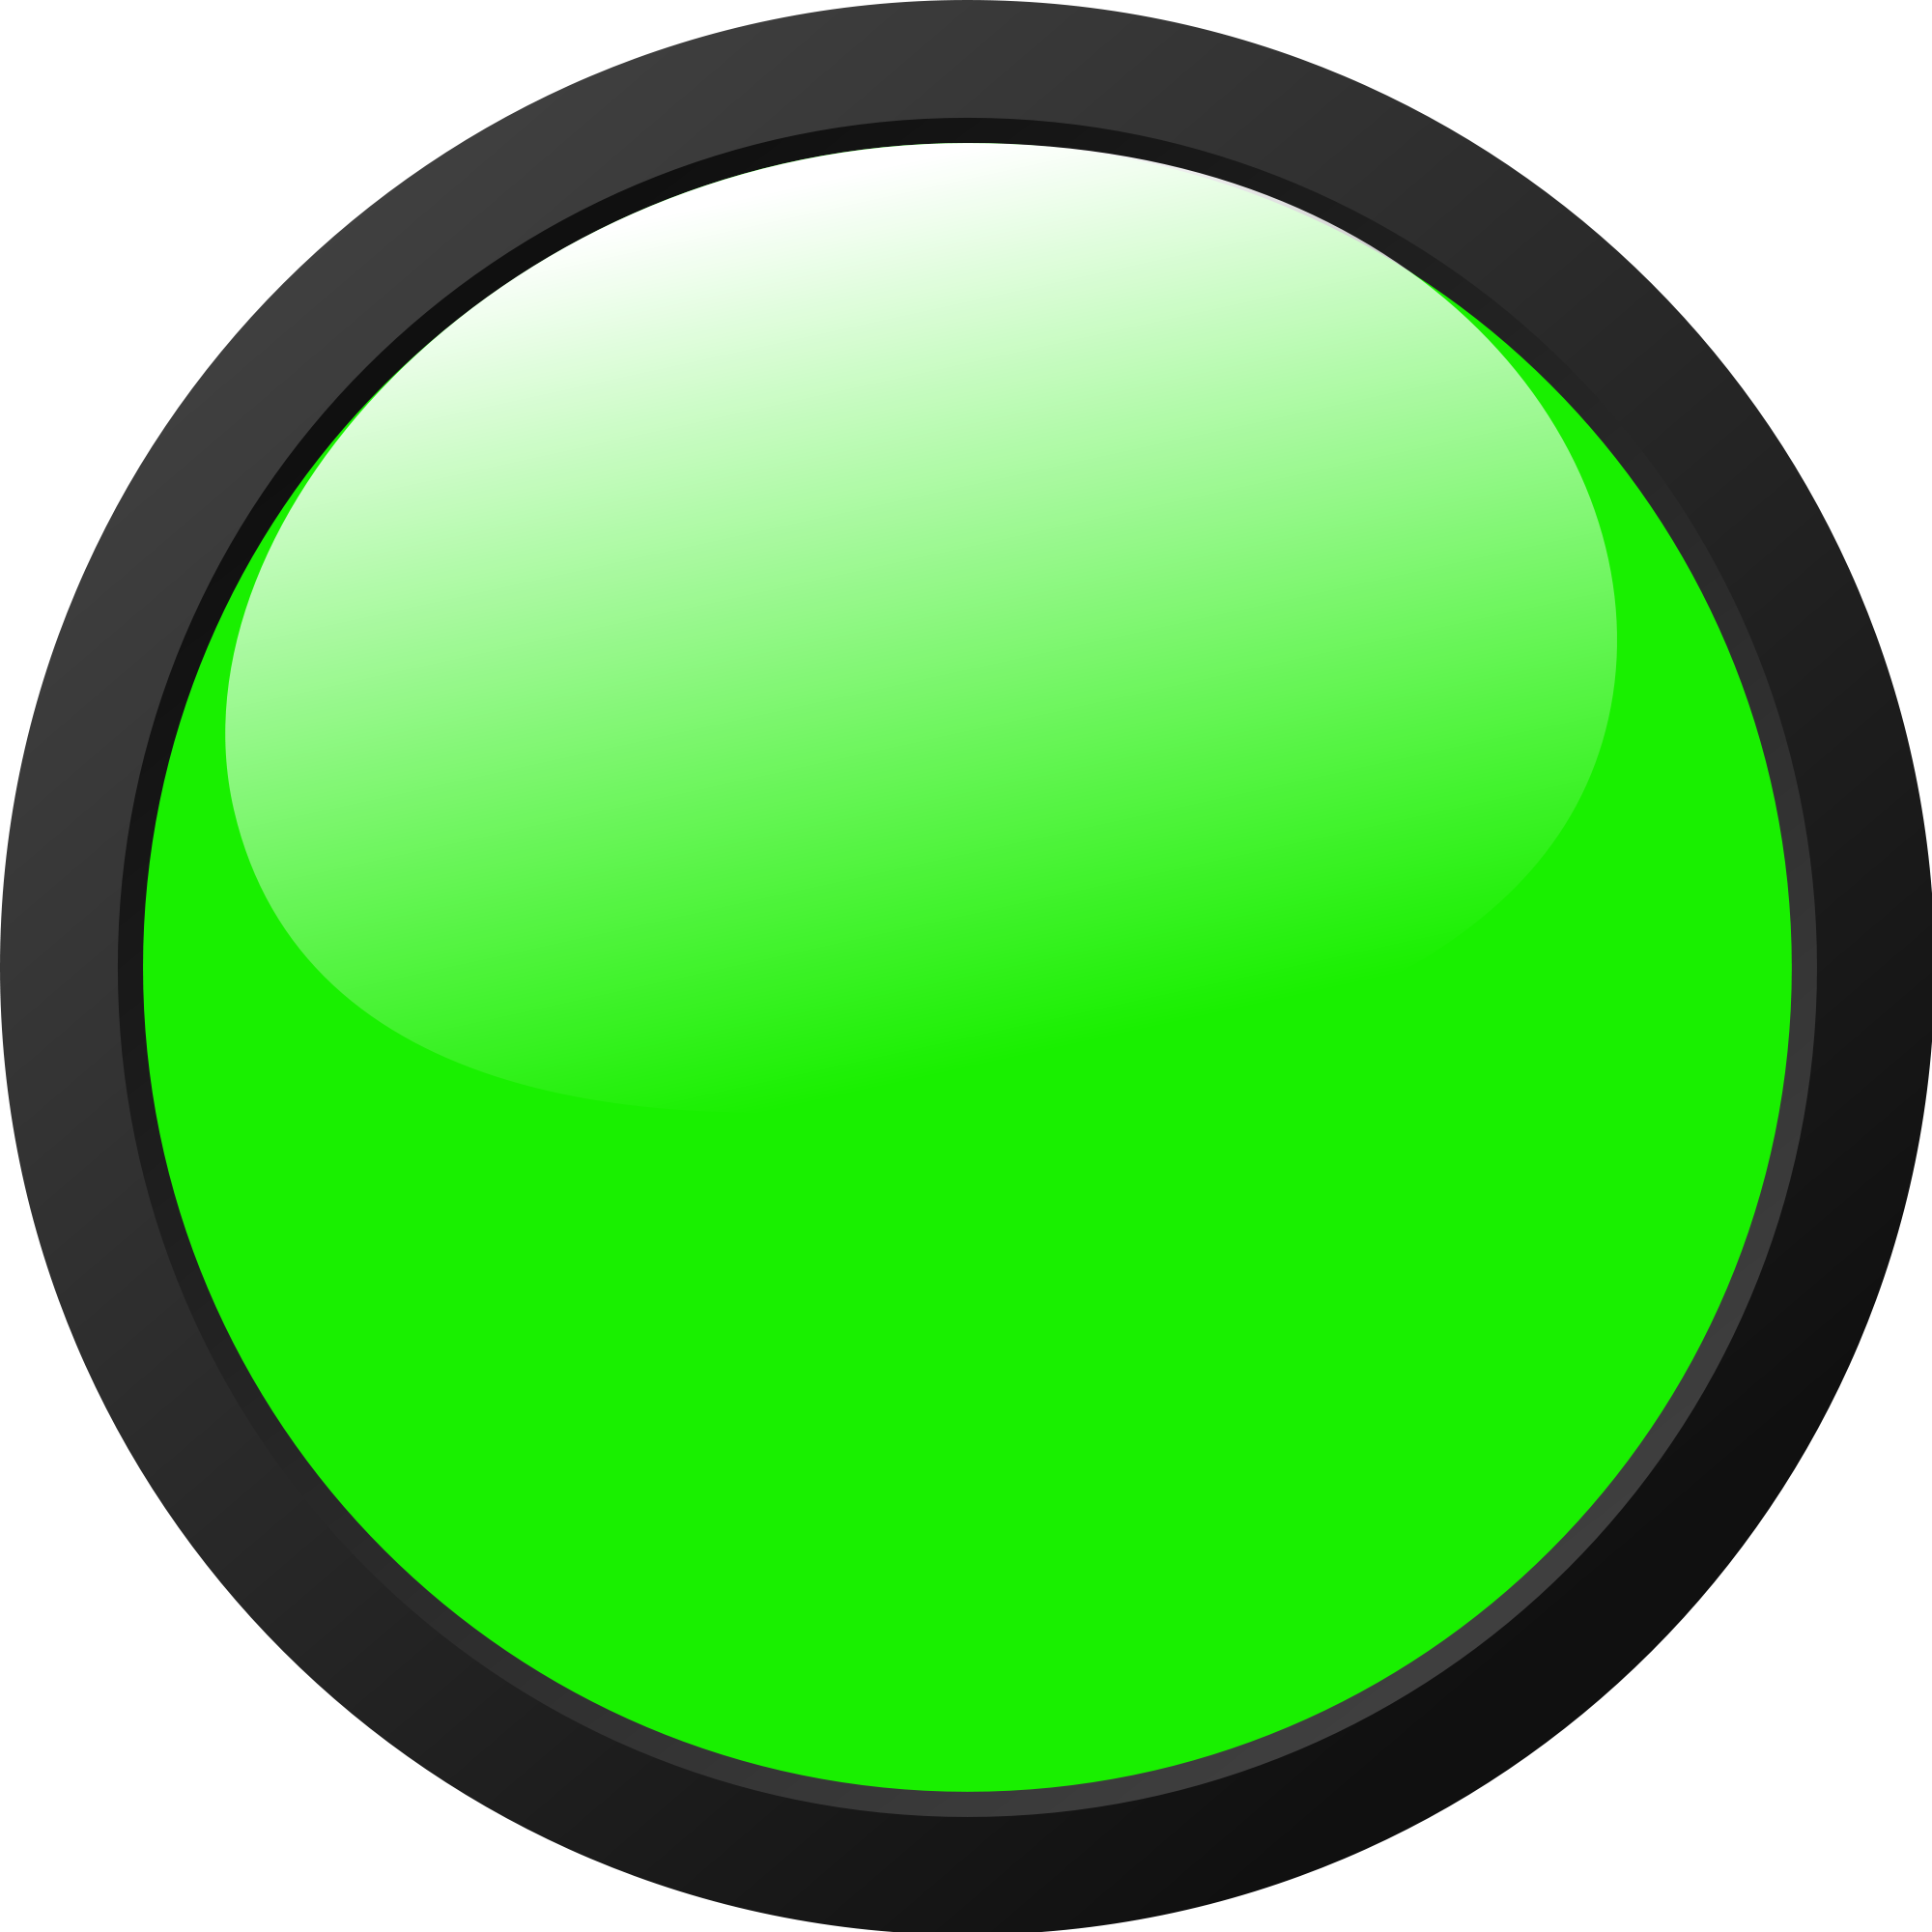 File:Green Light Icon.svg - Wikimedia Commons